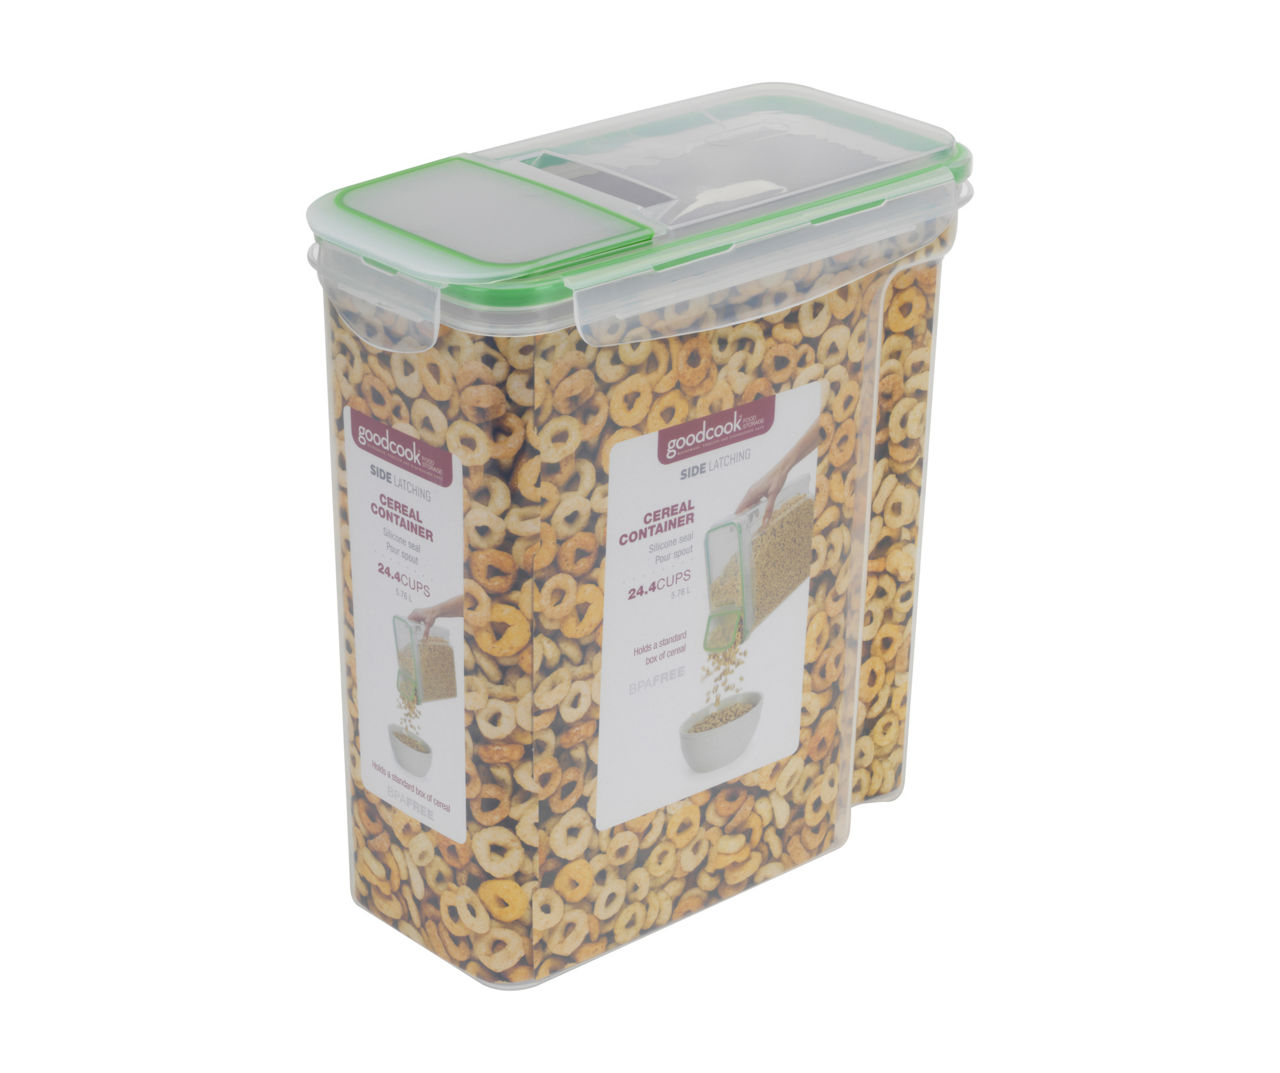 Good Cook 24-Cup Latching Cereal Container